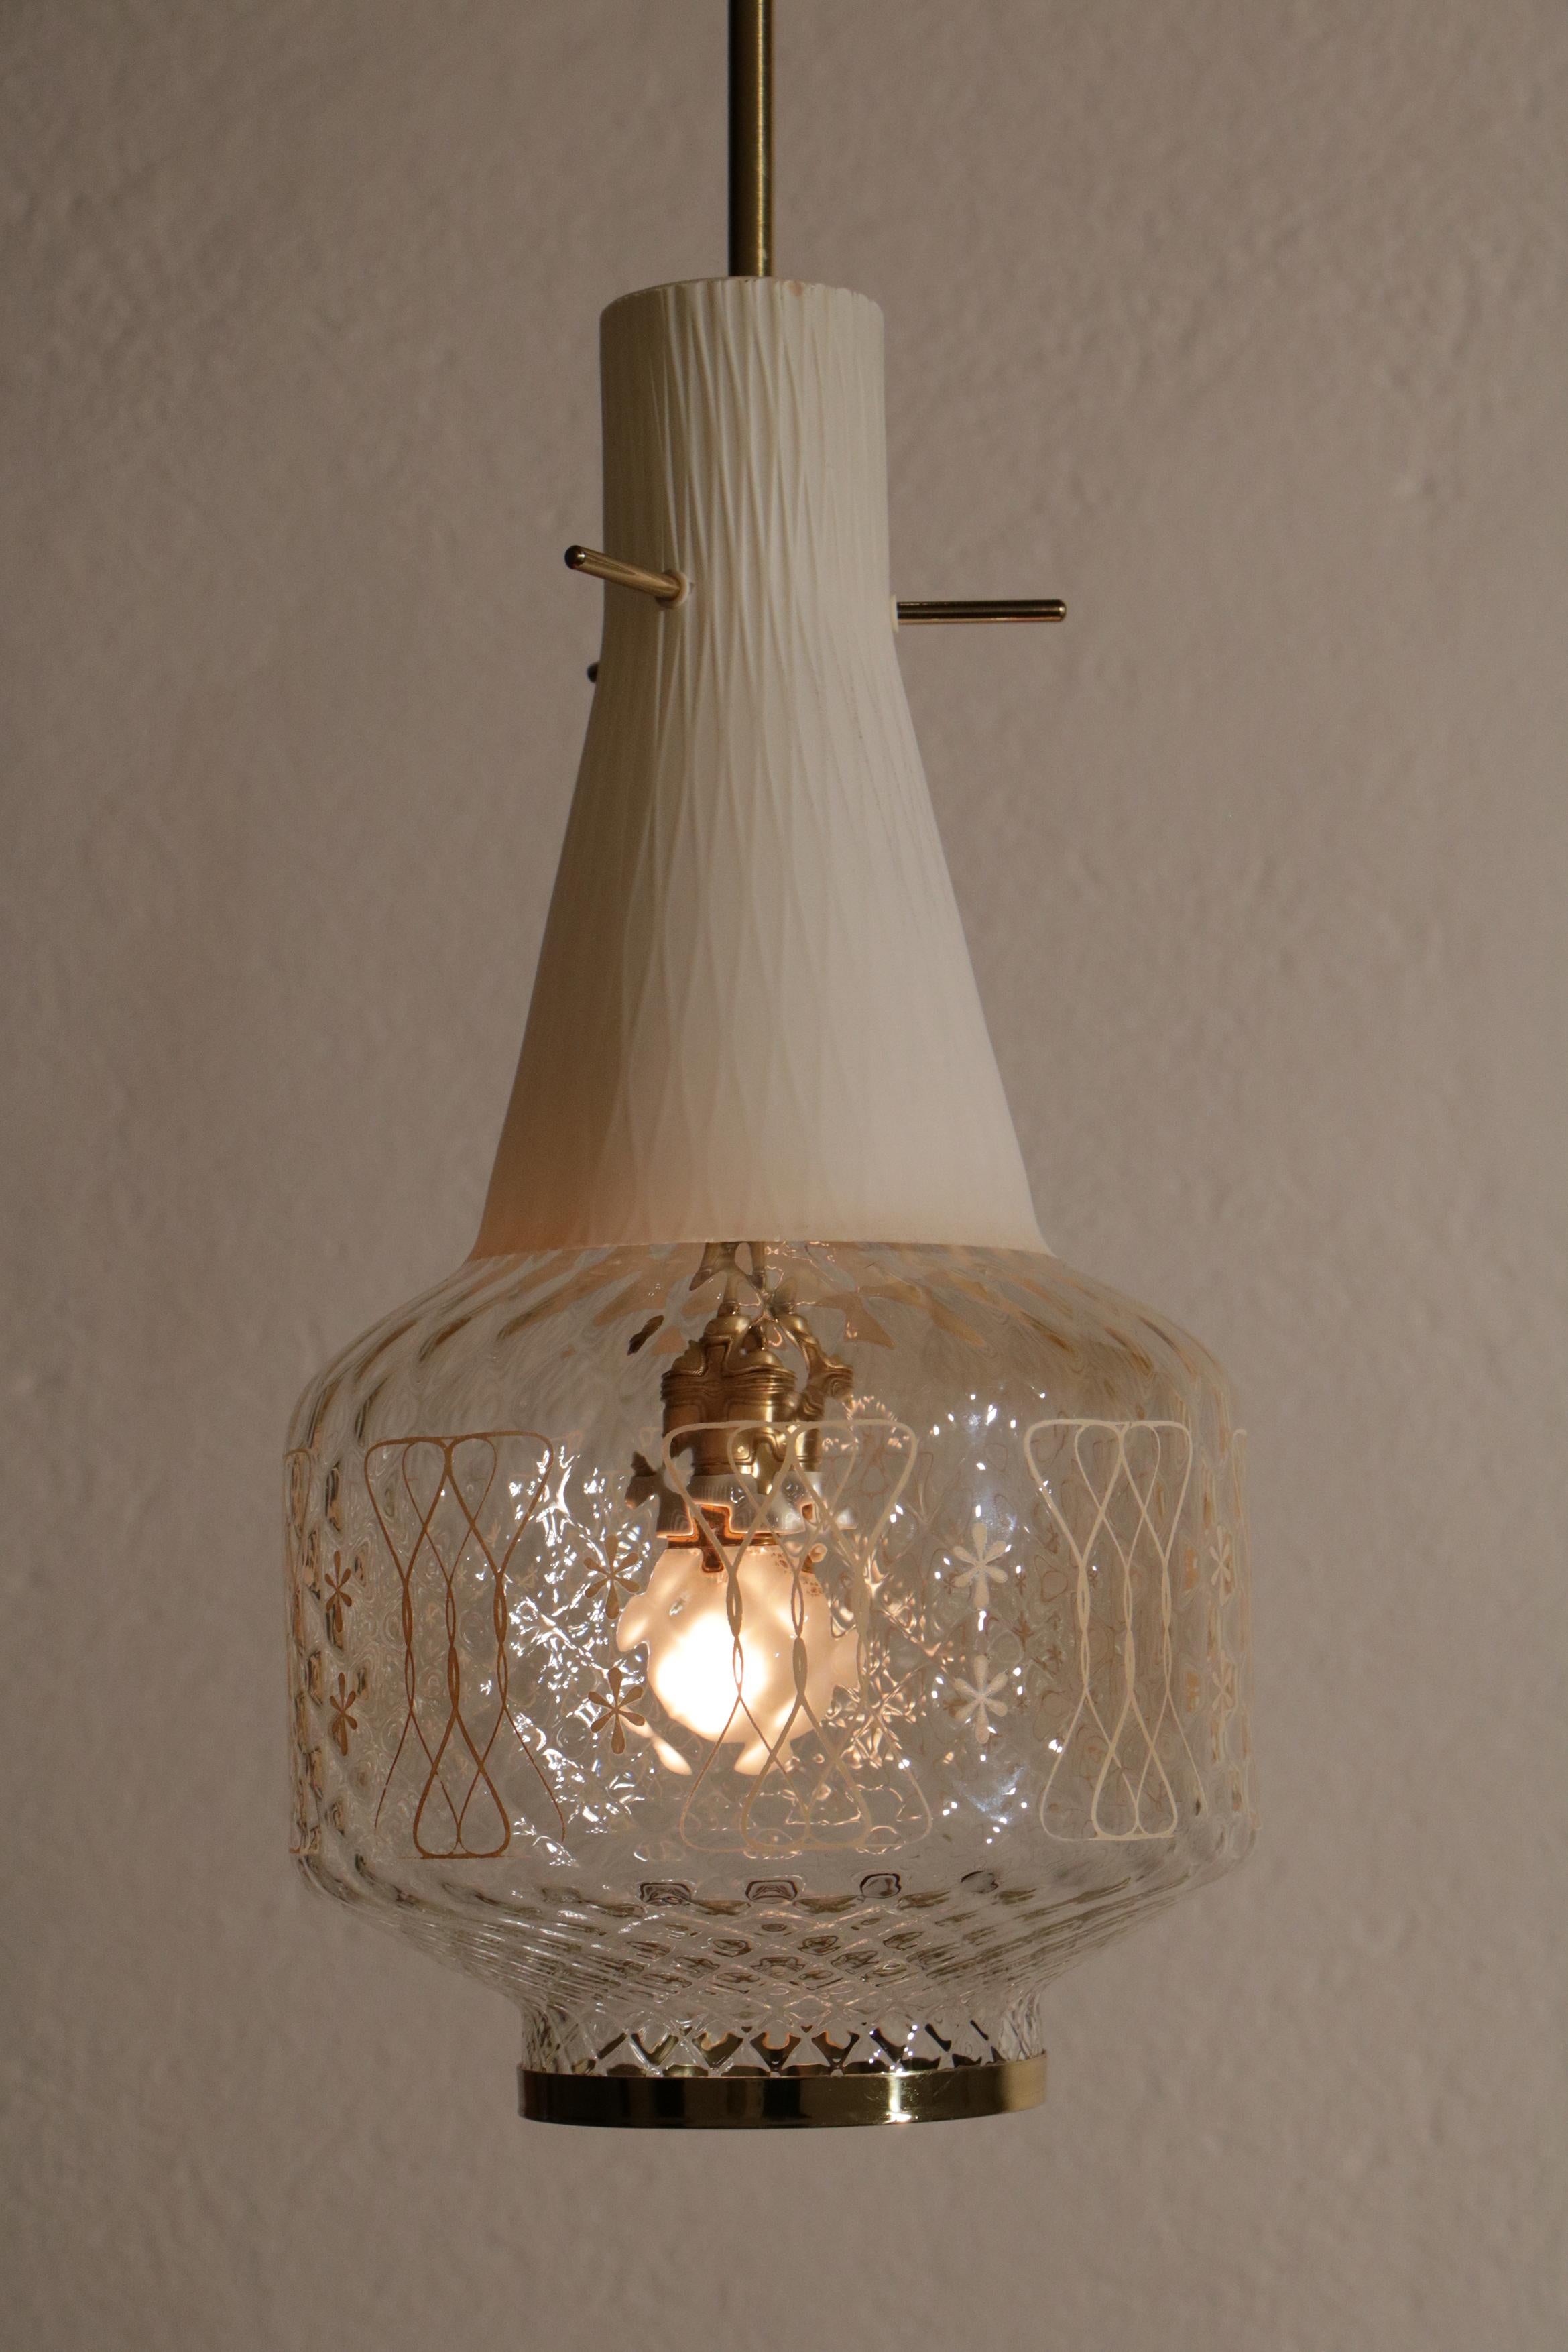 Beautiful Italian art deco hanging lamp from the 1950s, with decorative and satin glass. The hanging lamp has a polished brass structure, including edging. The restoration was made with great care by a specialized craftsman to bring back this